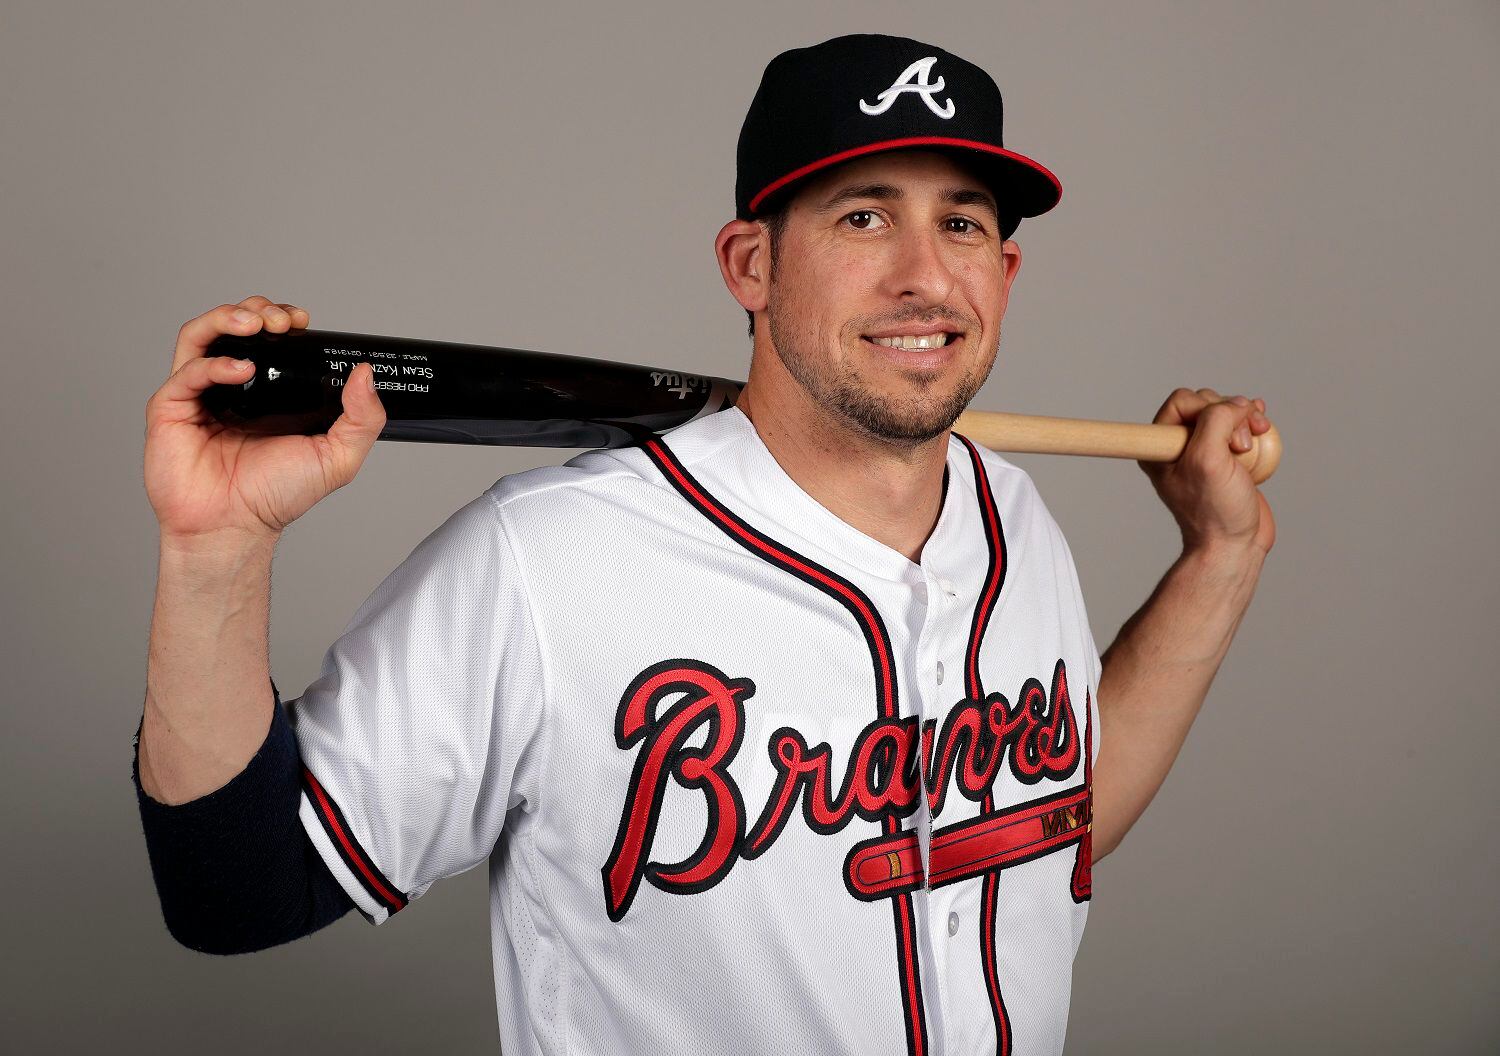 Braves' Kazmar returns to MLB for 1st game in nearly 13 years